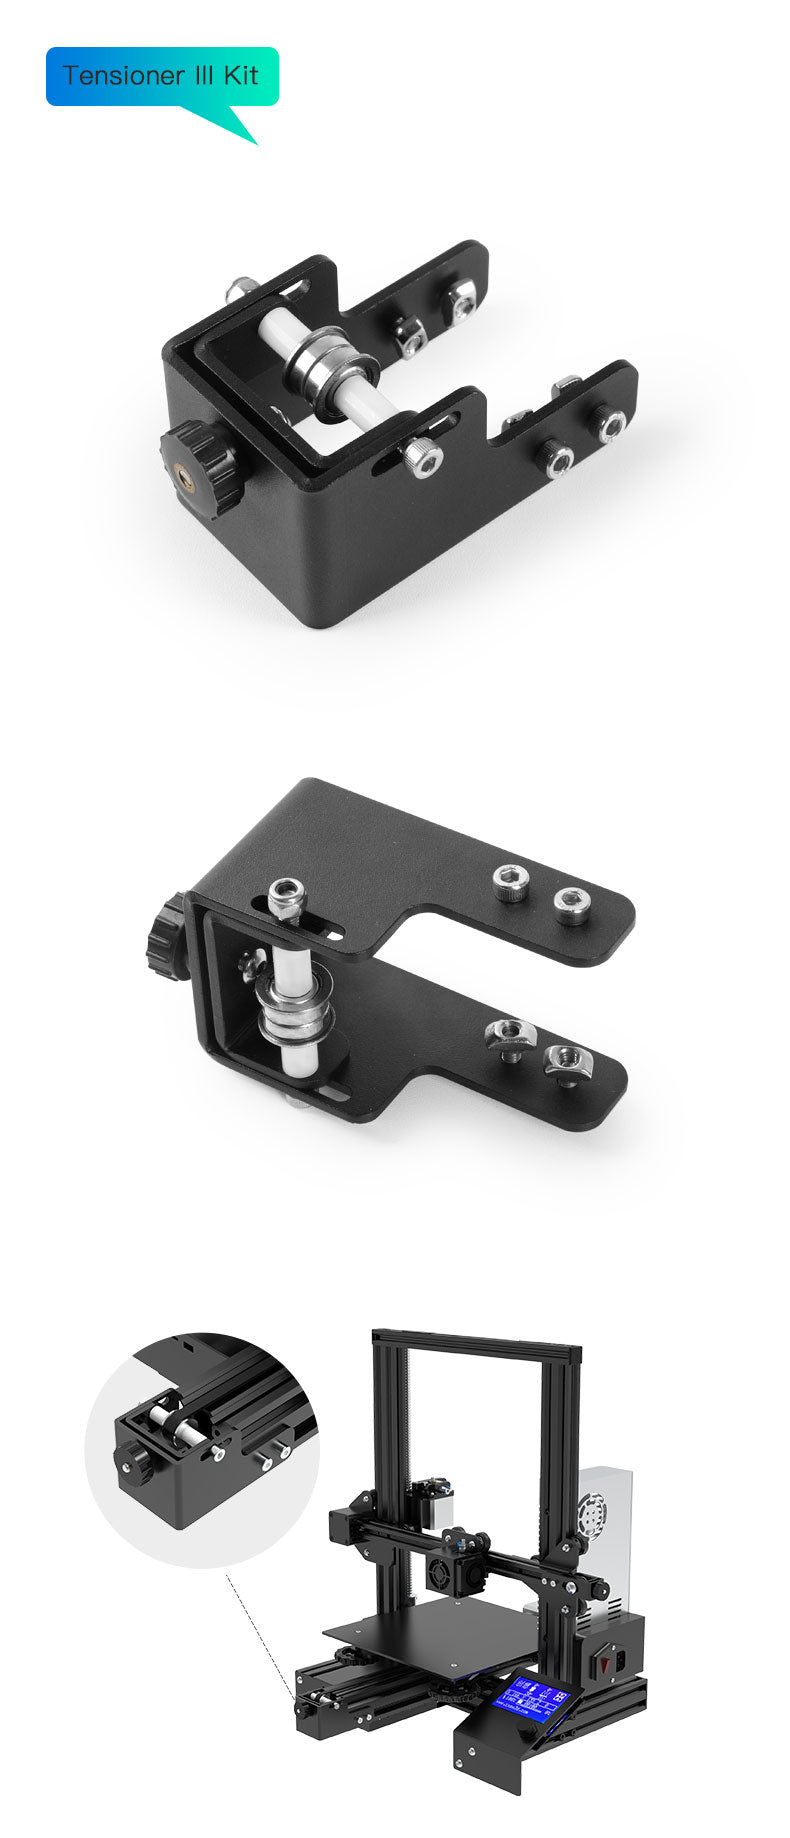 Timing Synchronous Belt Pulley Tensioner for Creality Ender 3/5 and CR-10 Series